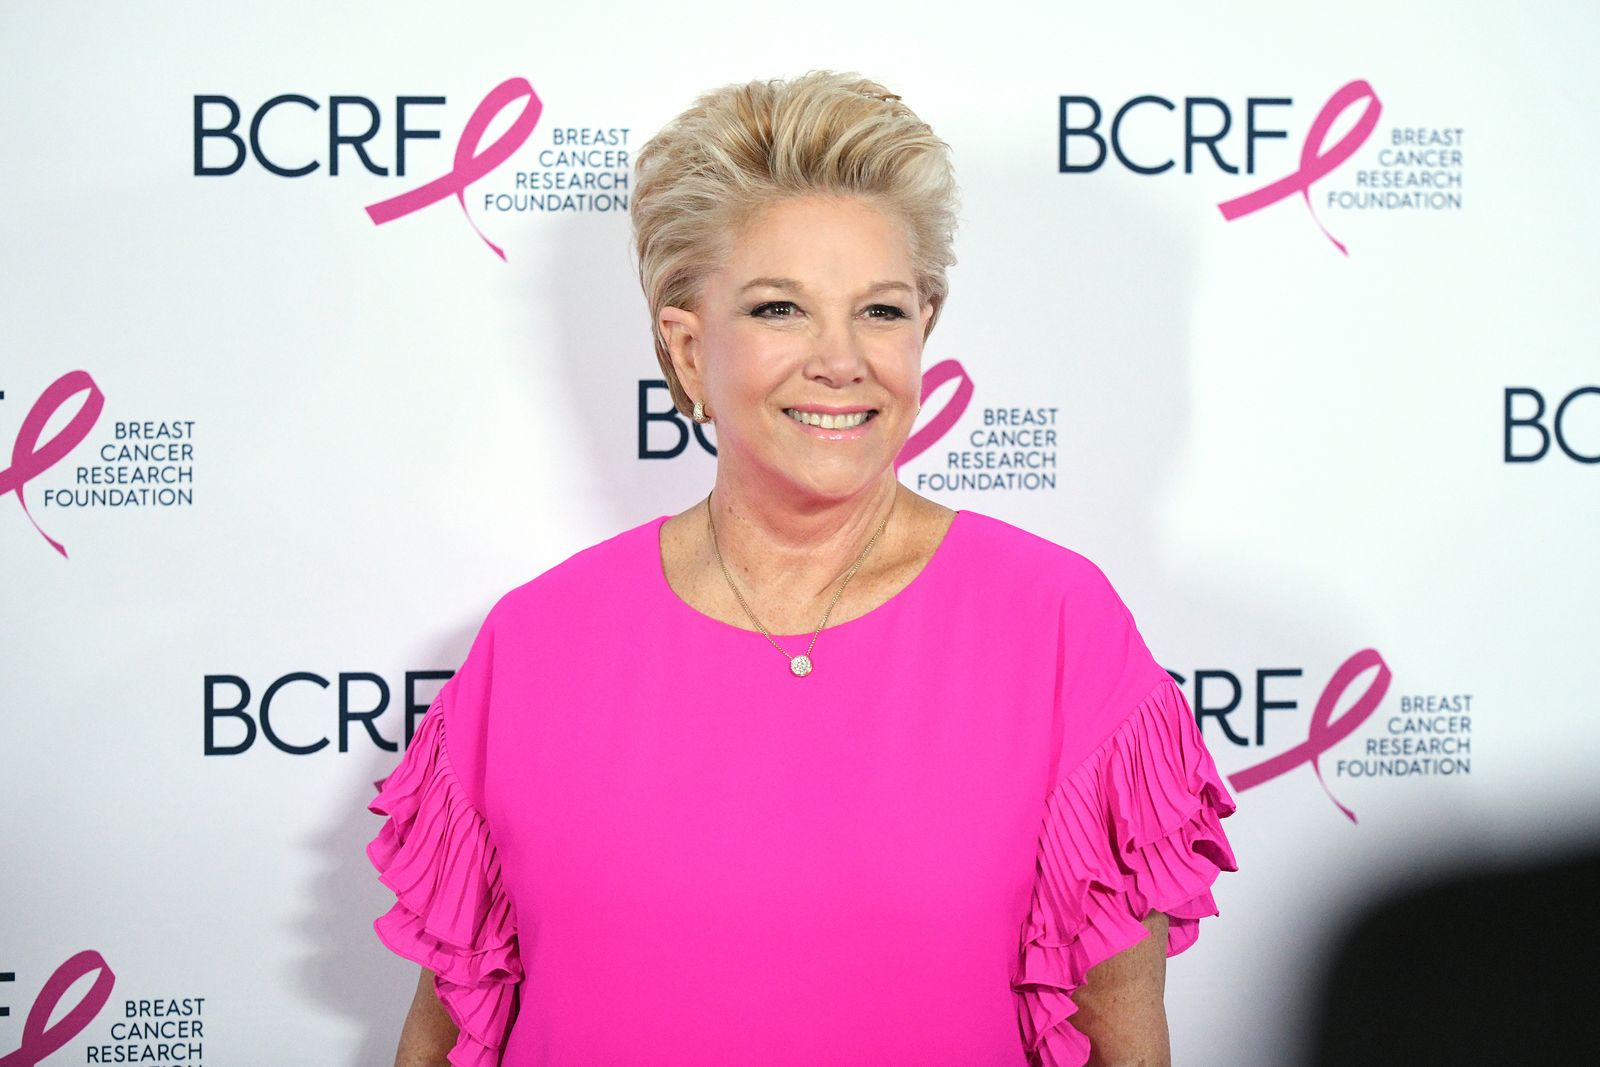 Joan Lunden at the Breast Cancer Research Foundation (BCRF) New York symposium & awards luncheon on October 17, 2019 | Photo: Getty Images